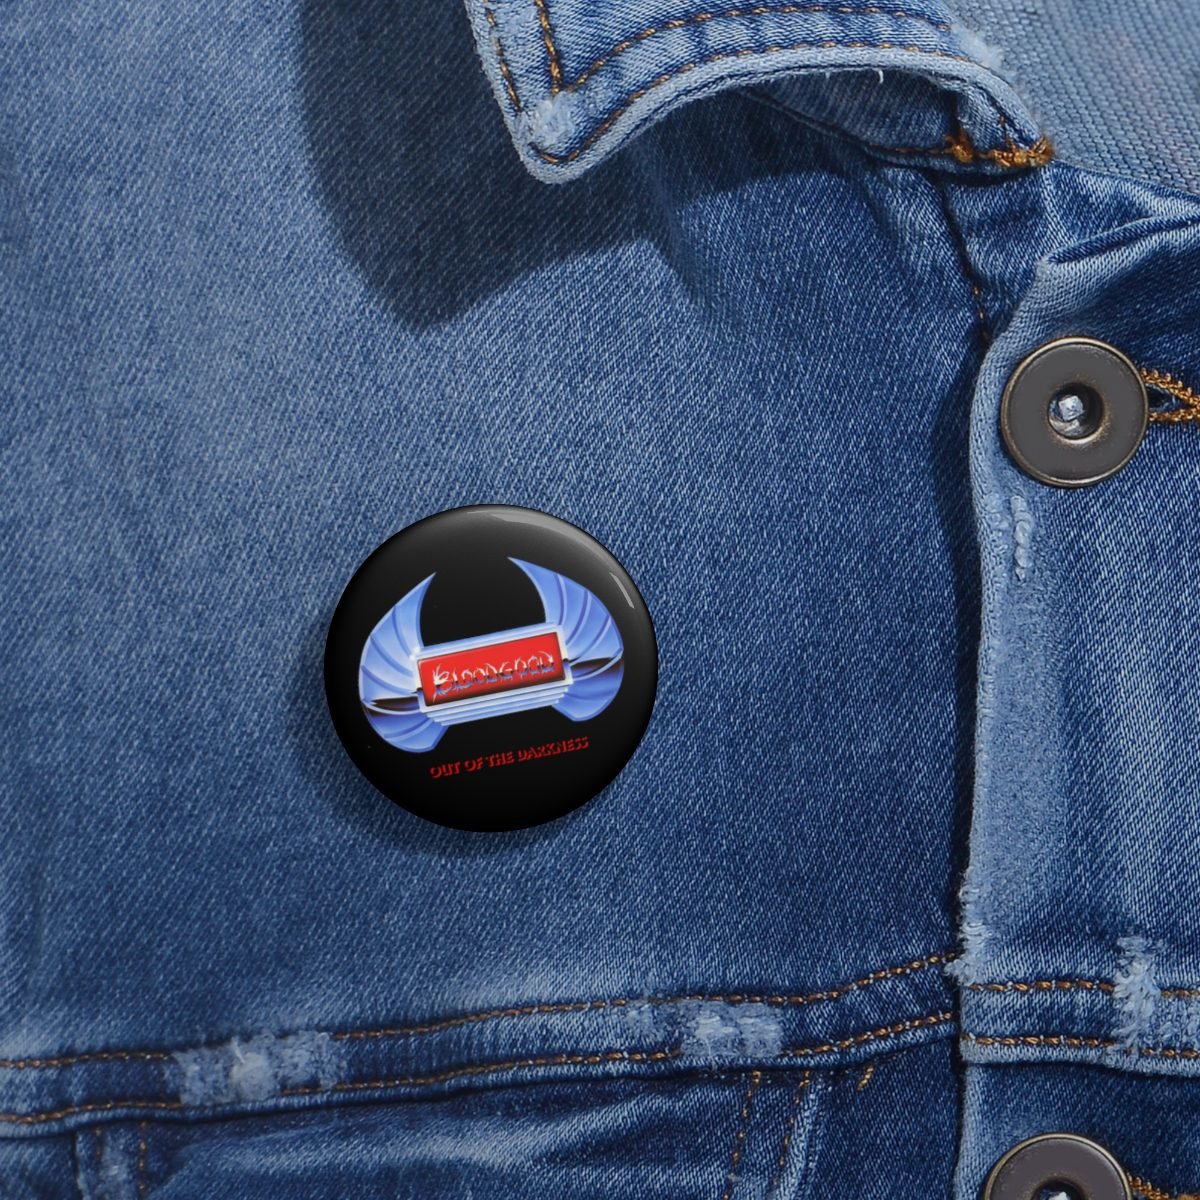 Bloodgood – Out Of The Darkness Pin Buttons